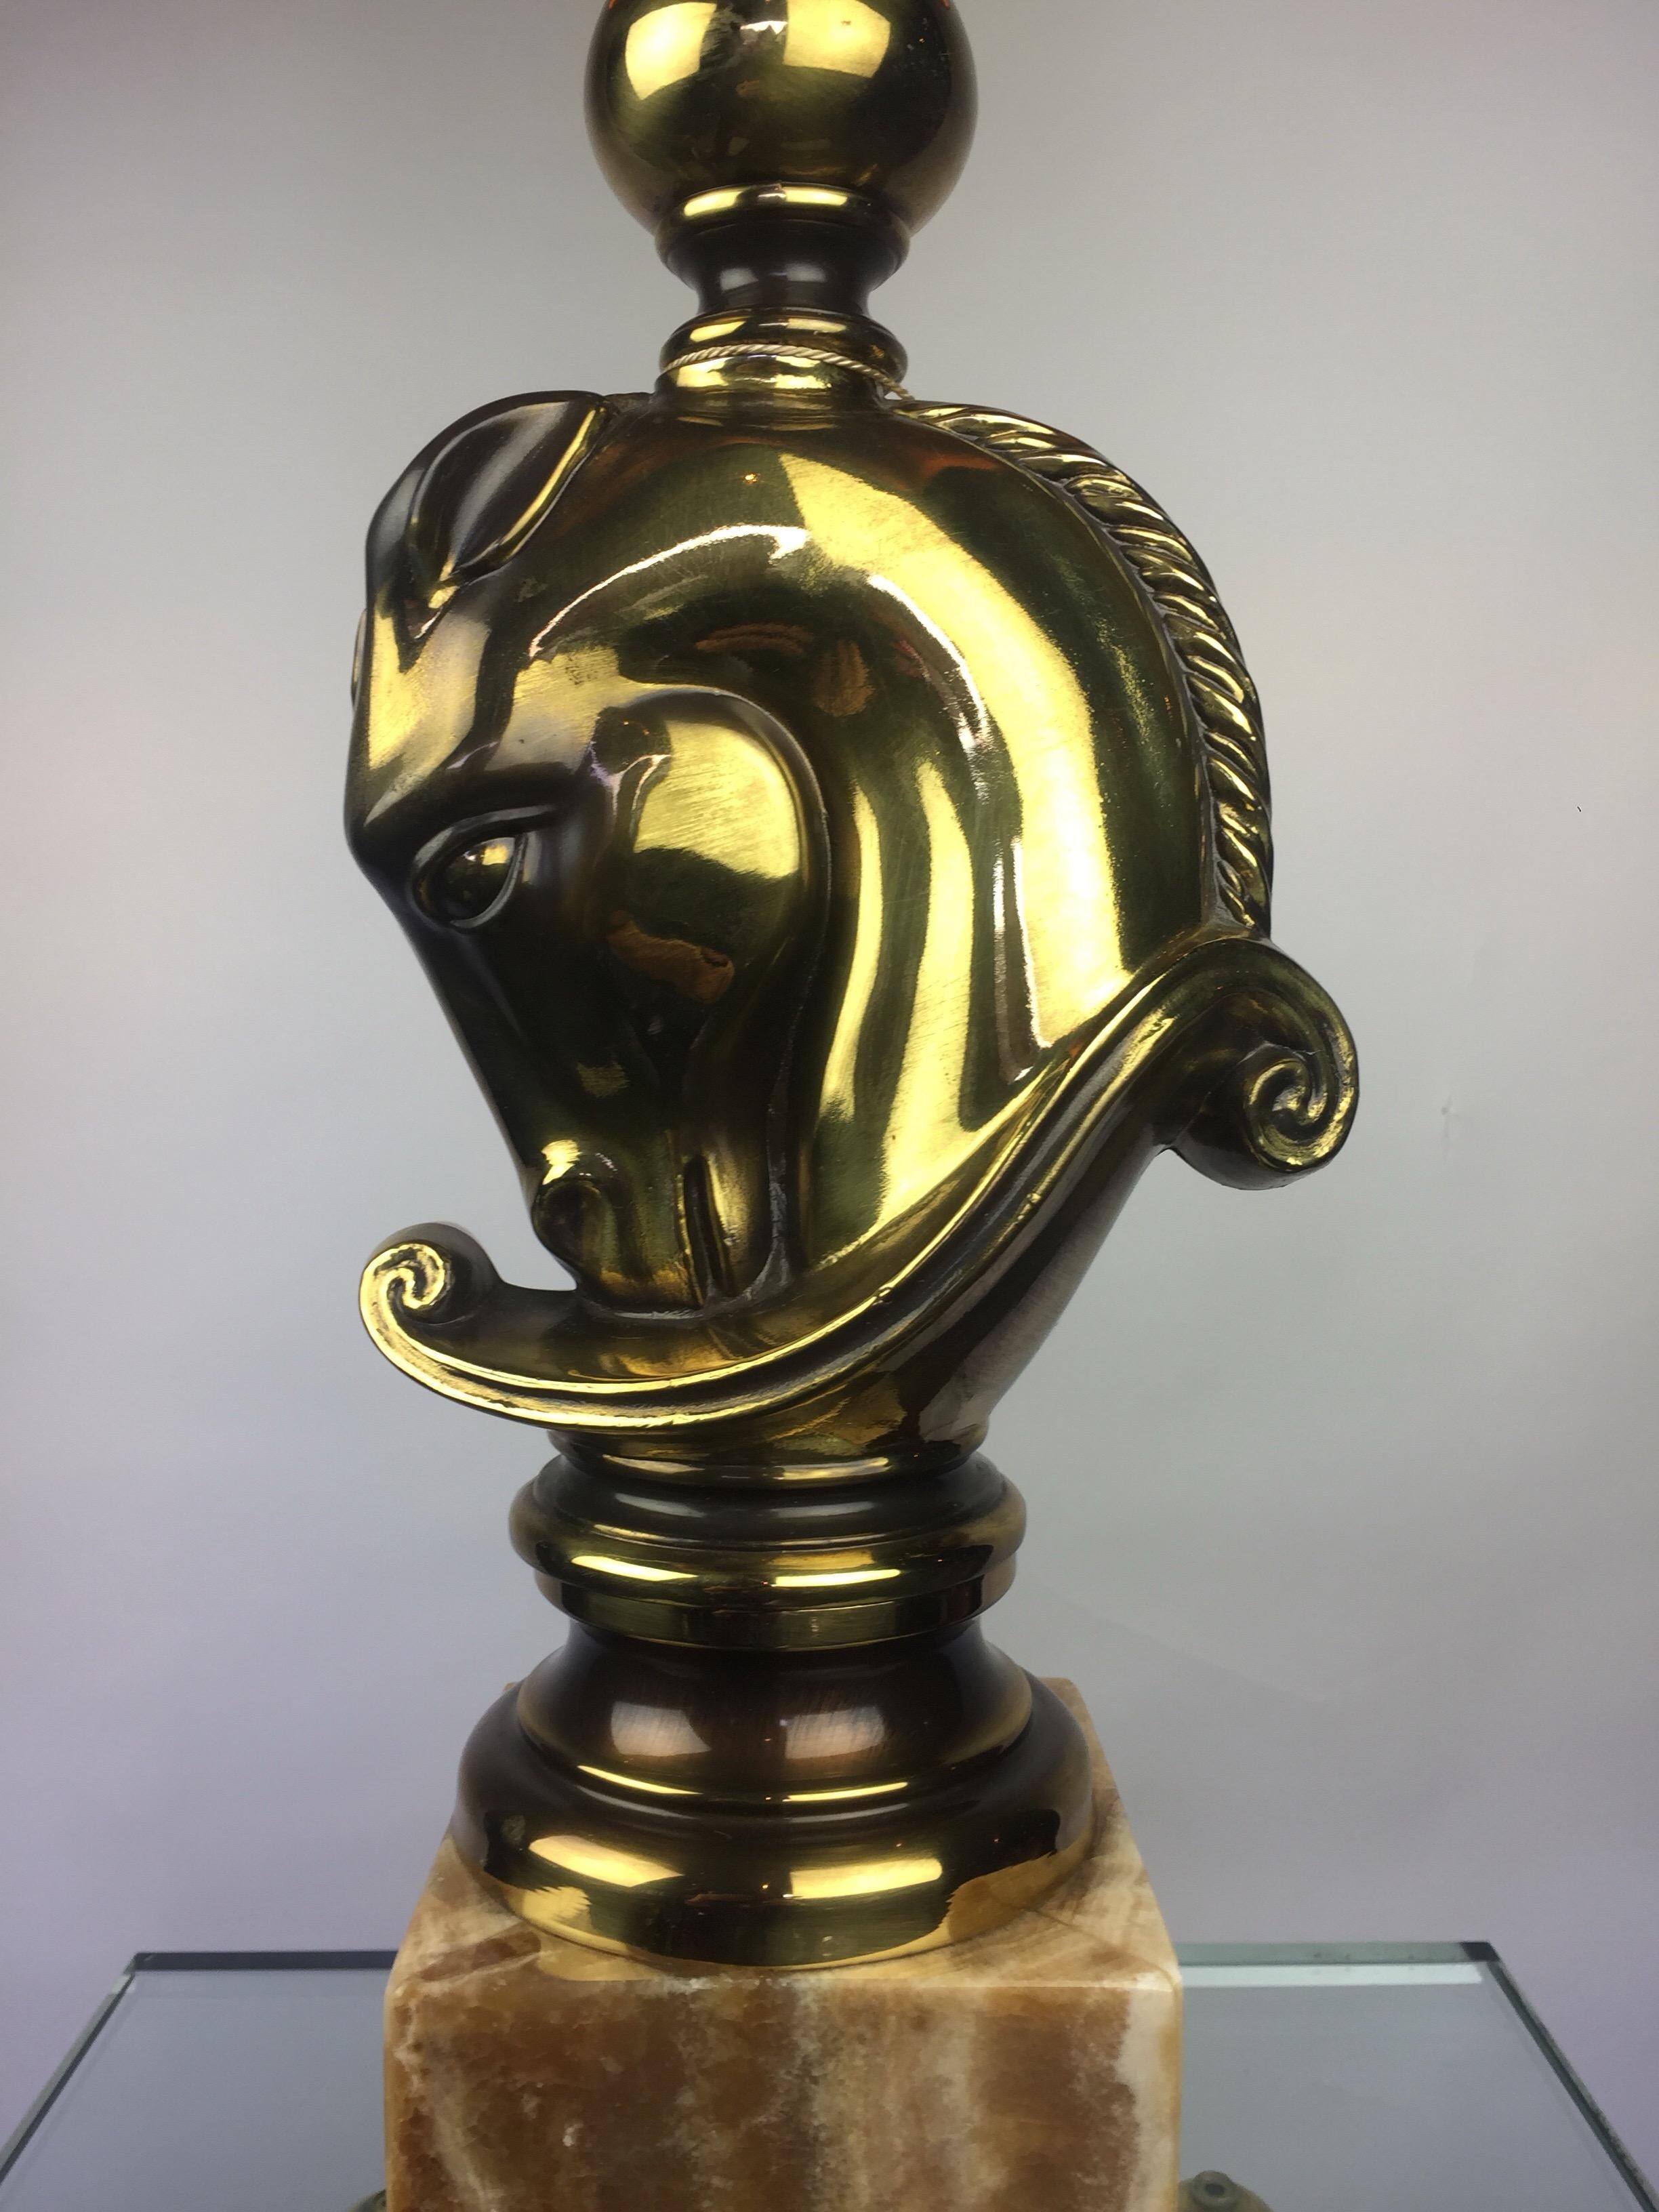 Elegant Hollywood Recency Style Horsehead Table lamp, 
Side Light , Table Lighting made by Deknudt Lustrerie, Belgium in the 1970s.
This Chess Piece Table Light by Maison Deknudt is made of bronze and brass metal horse on a brown Veined Onyx Base, a